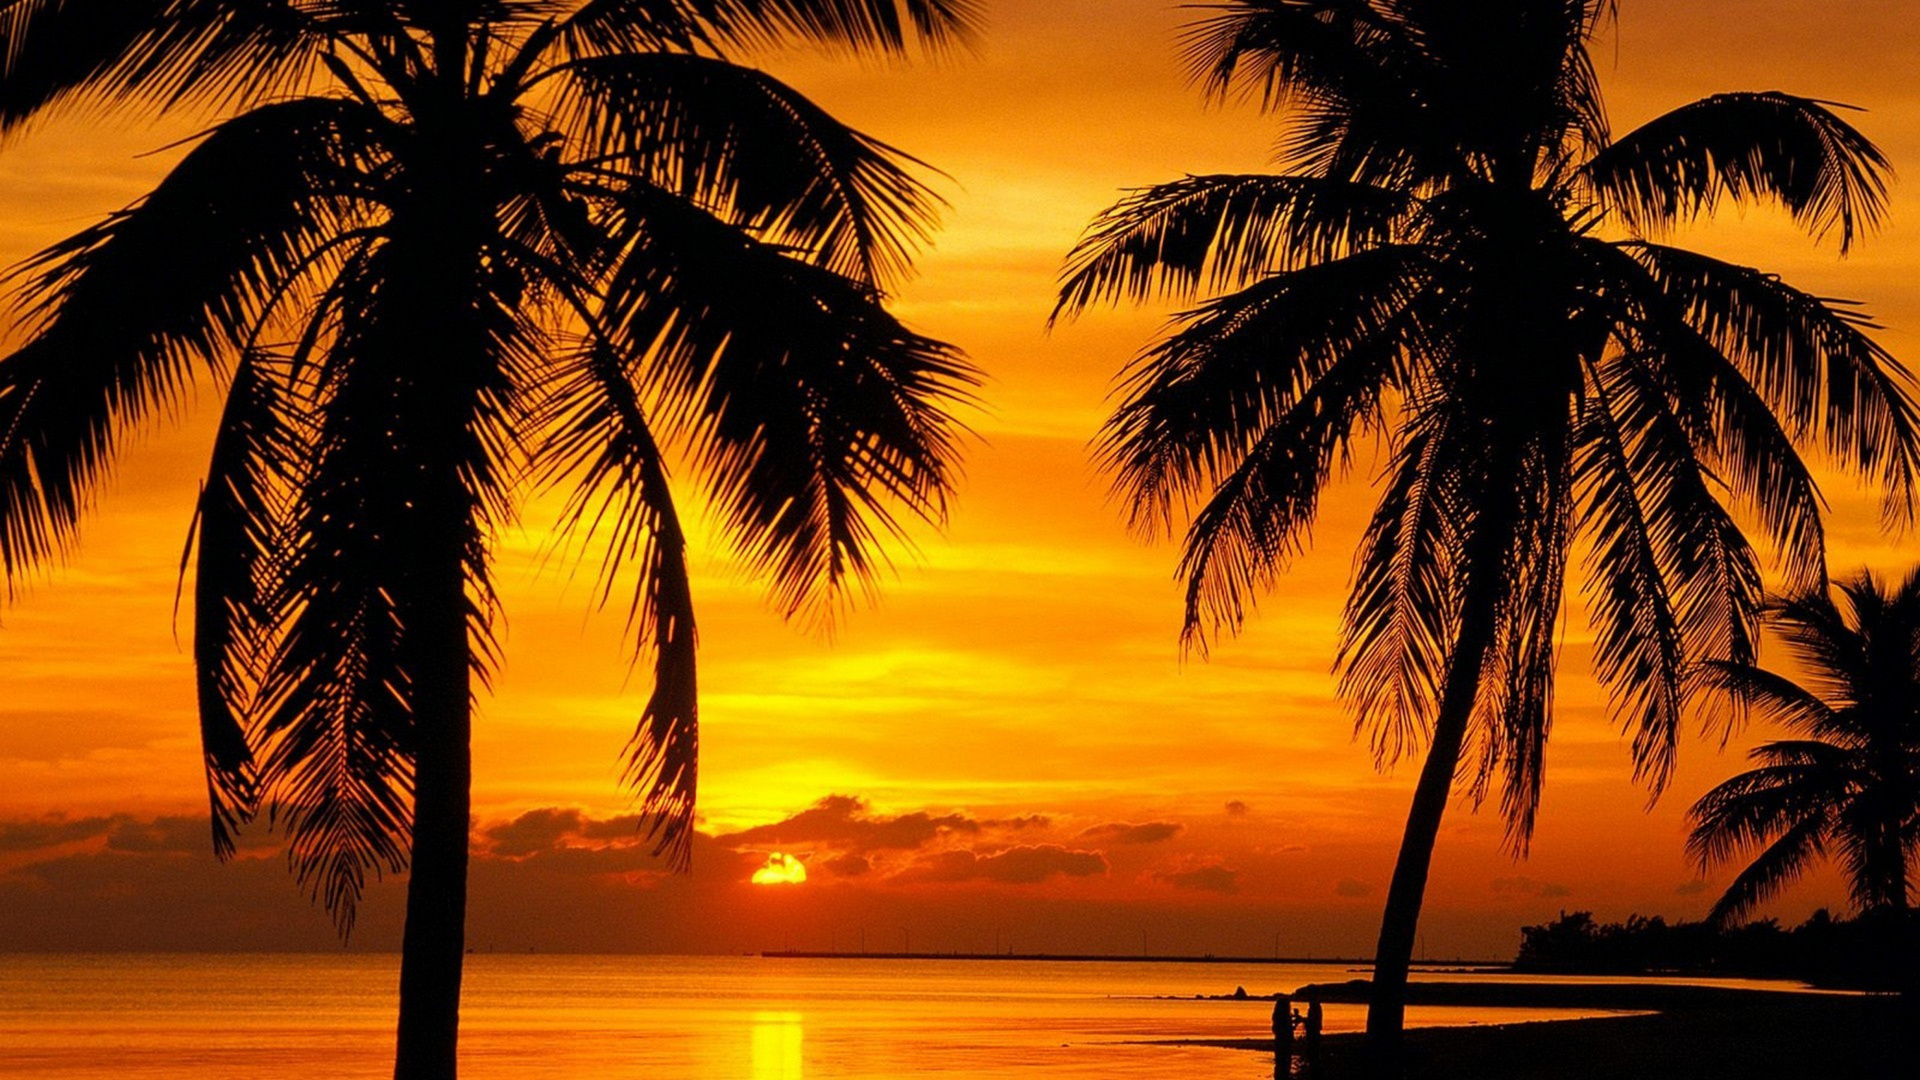 Silhouette of Palm Tree Near Body of Water During Sunset. Wallpaper in 1920x1080 Resolution